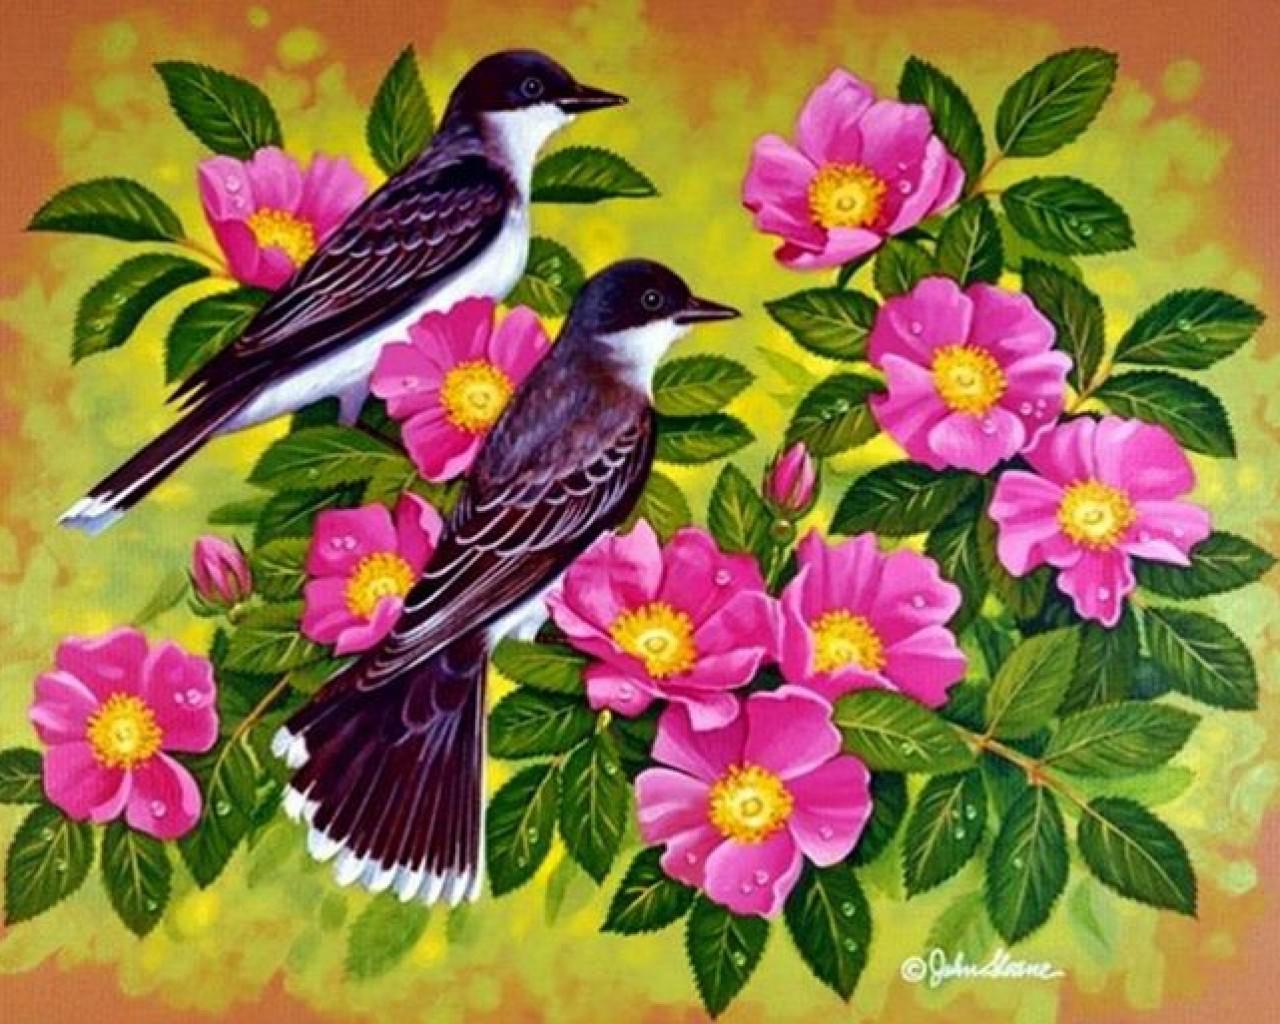 Wallpaper with Flowers and Birds